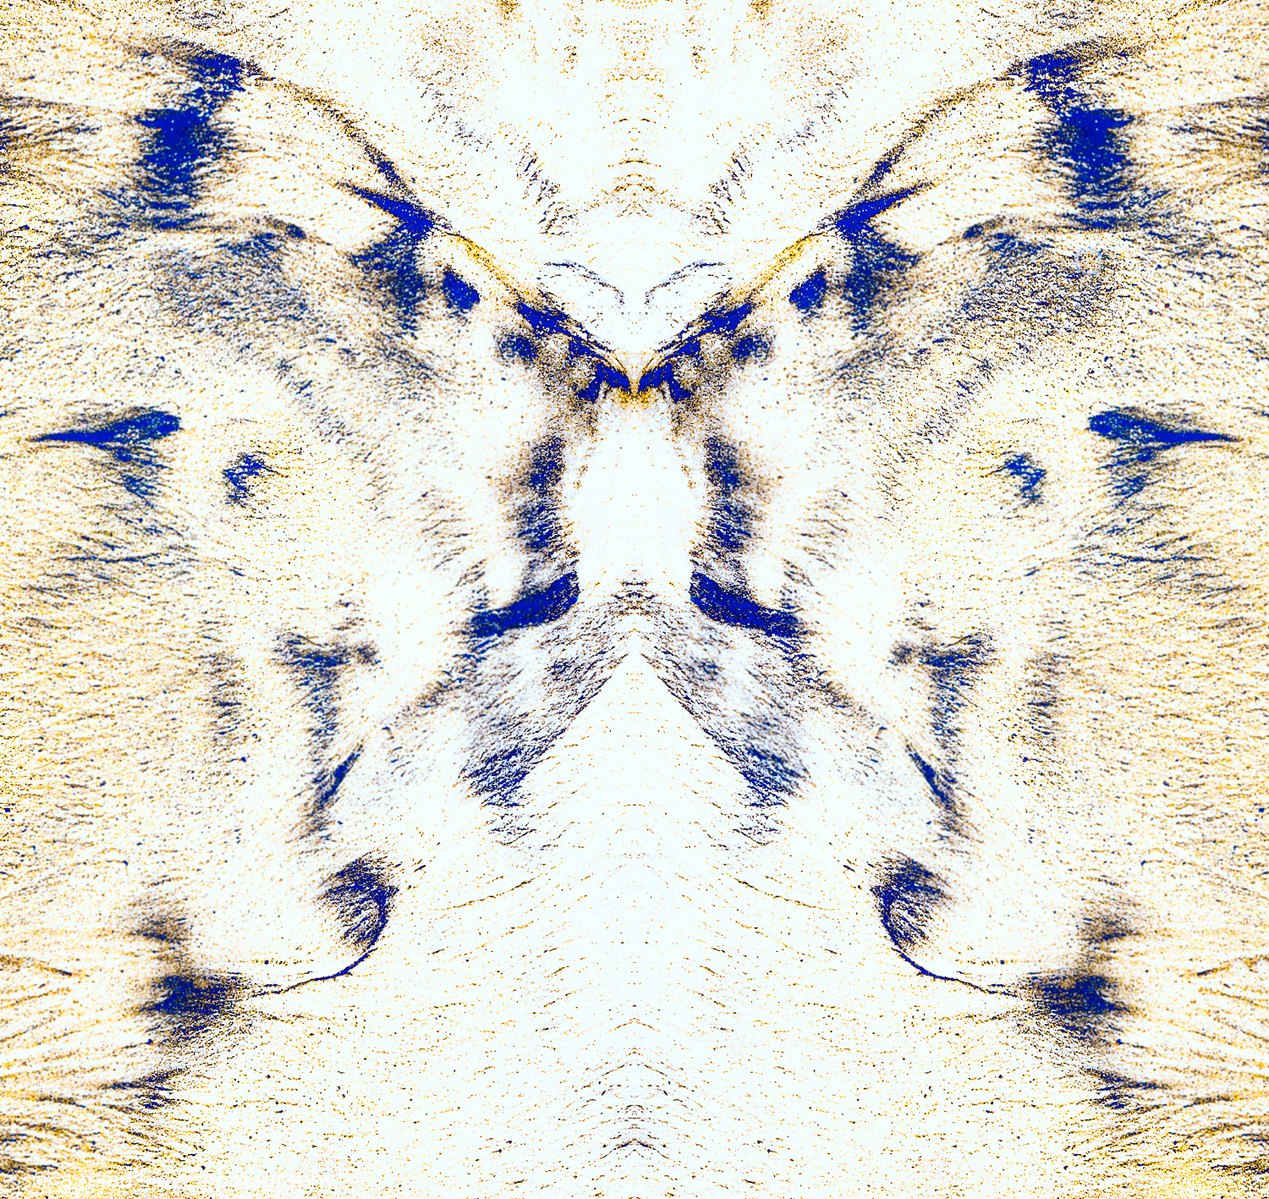 A symmetrical colour abstract based an original image of nature asking "What do you see?"